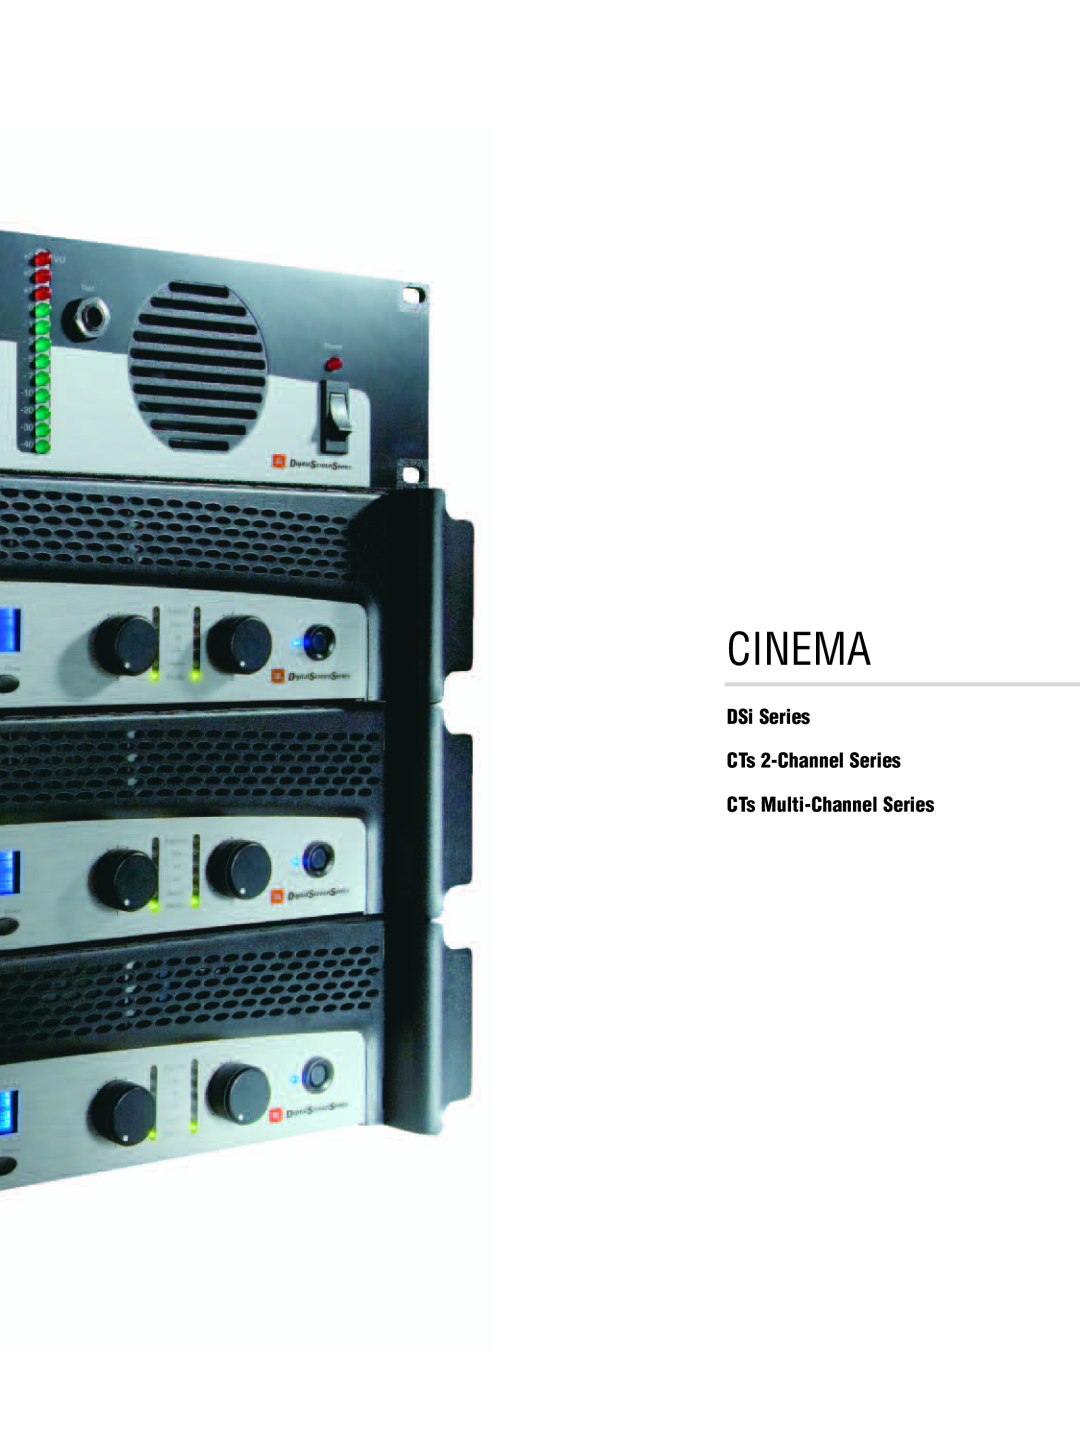 Crown CTS 2000, CTS 3000, CTS 1200, CTS 600 manual Cinema, DSi Series CTs 2-ChannelSeries, CTs Multi-ChannelSeries 